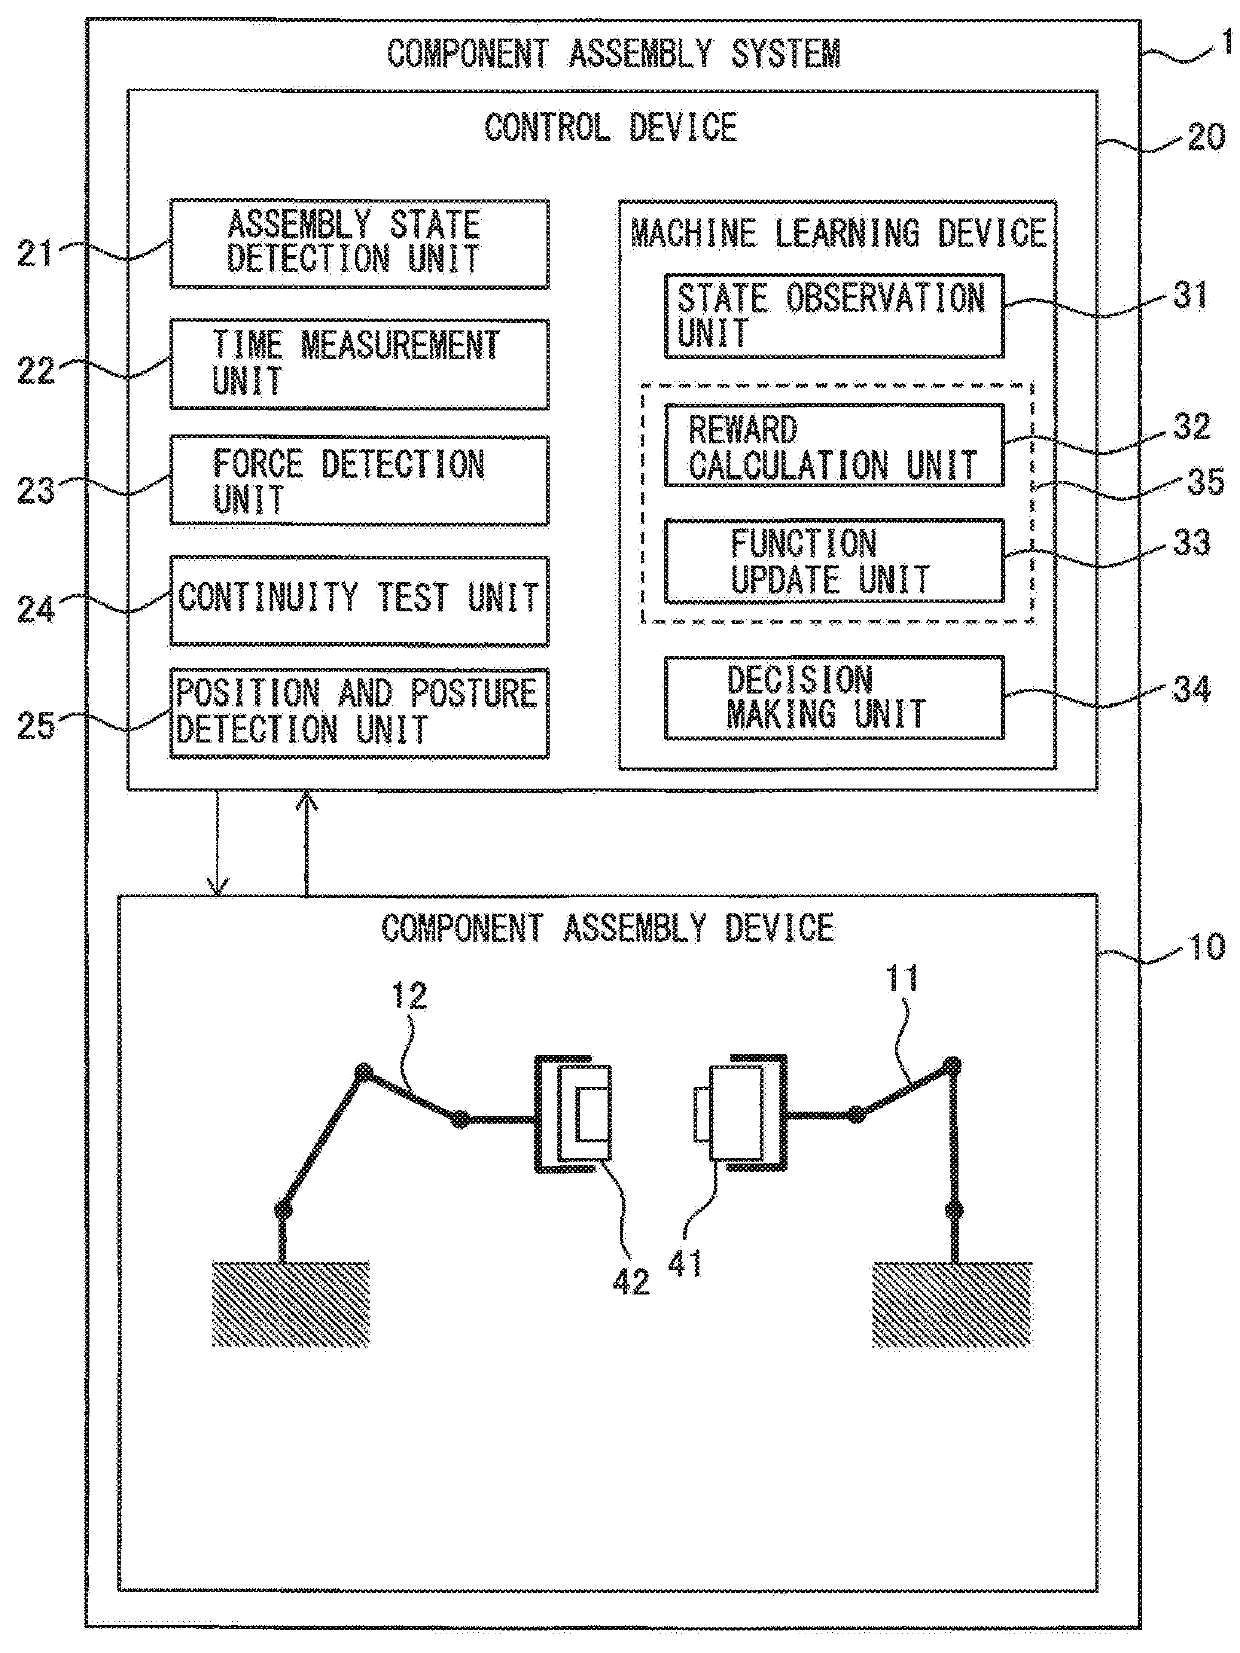 Machine learning device for learning assembly operation and component assembly system